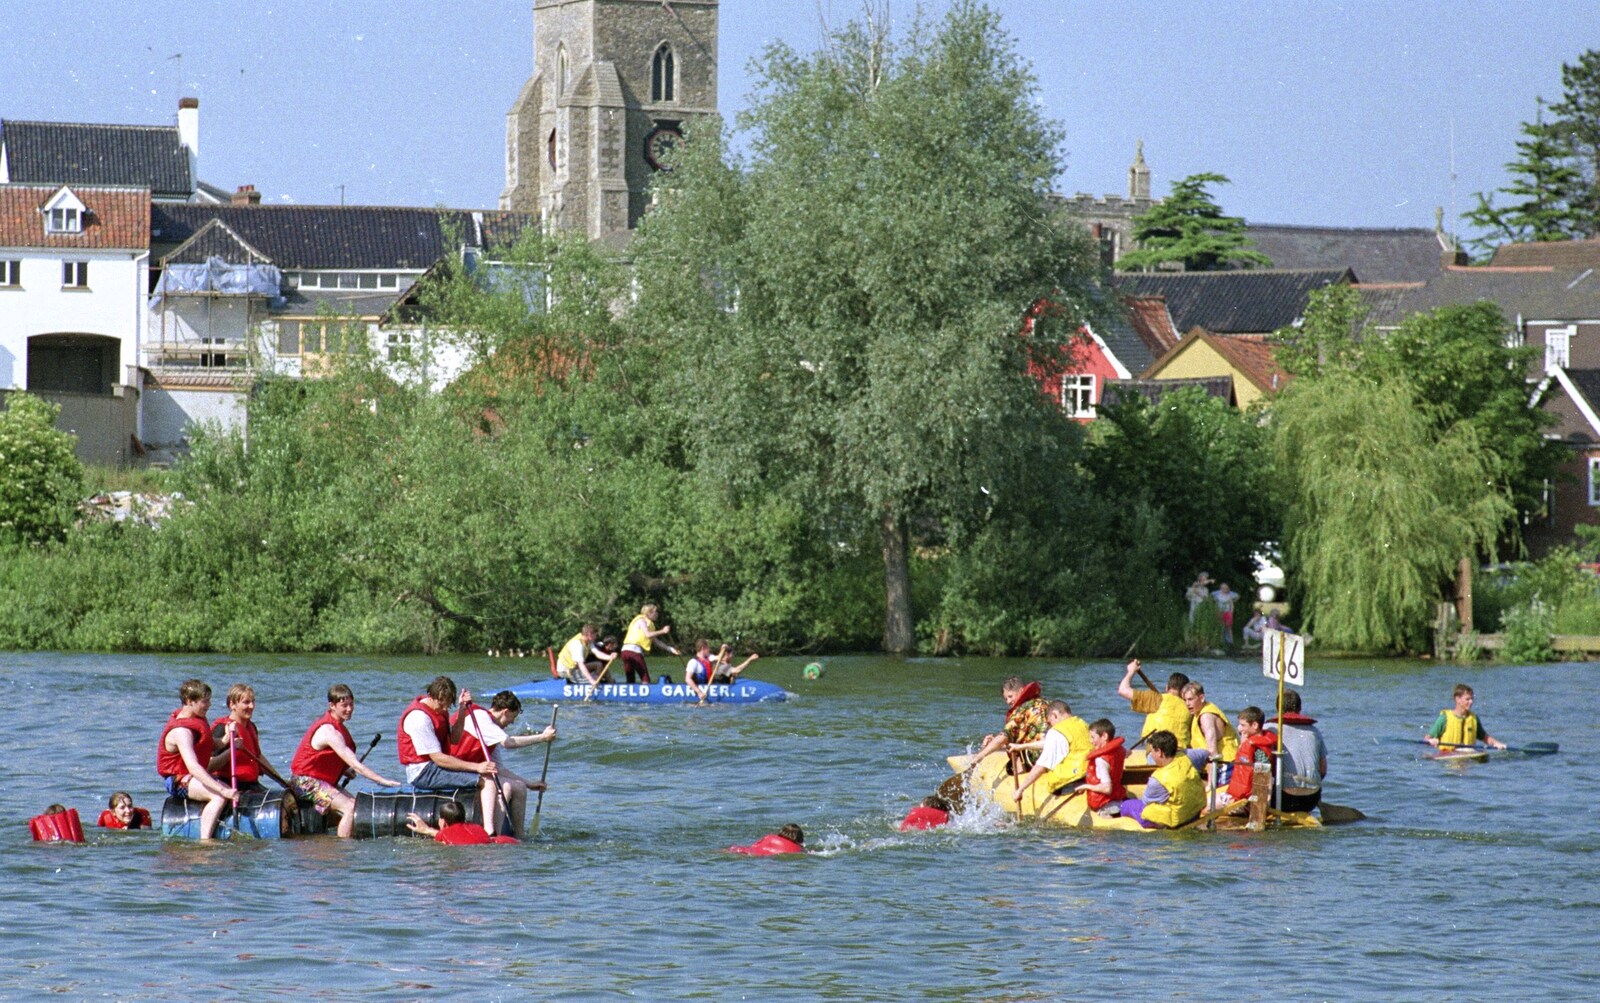 More paddlers end up in the Mere from The Diss Raft Race, Diss Mere, Norfolk - 6th July 1991